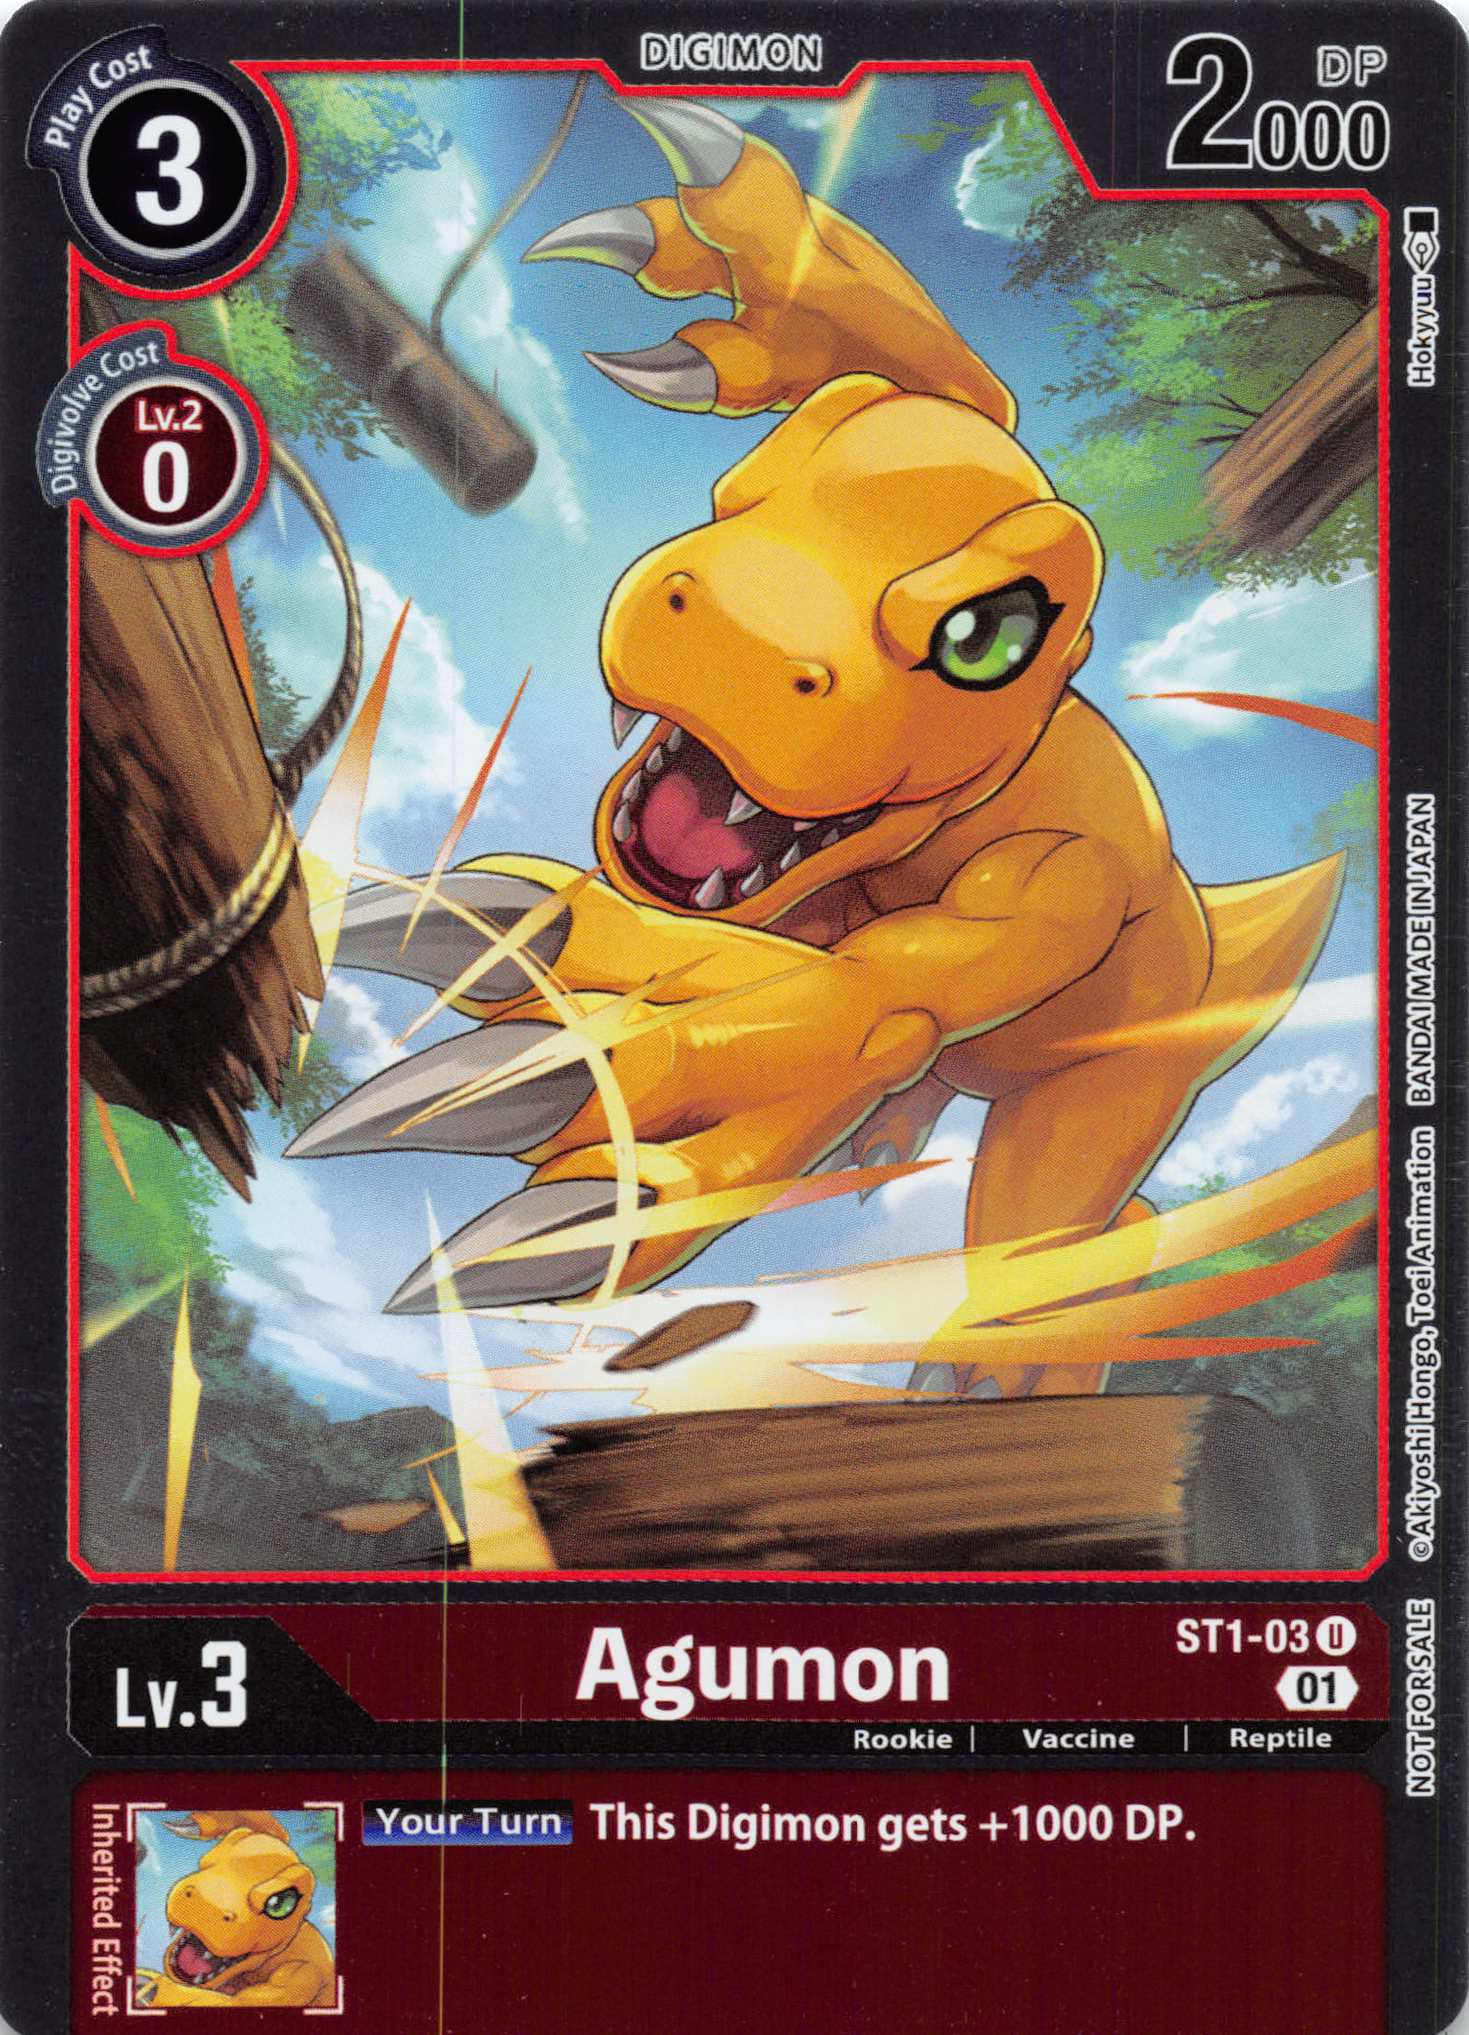 Agumon - ST1-03 (ST-11 Special Entry Pack) [ST1-03] [Starter Deck 01: Gaia Red] Foil